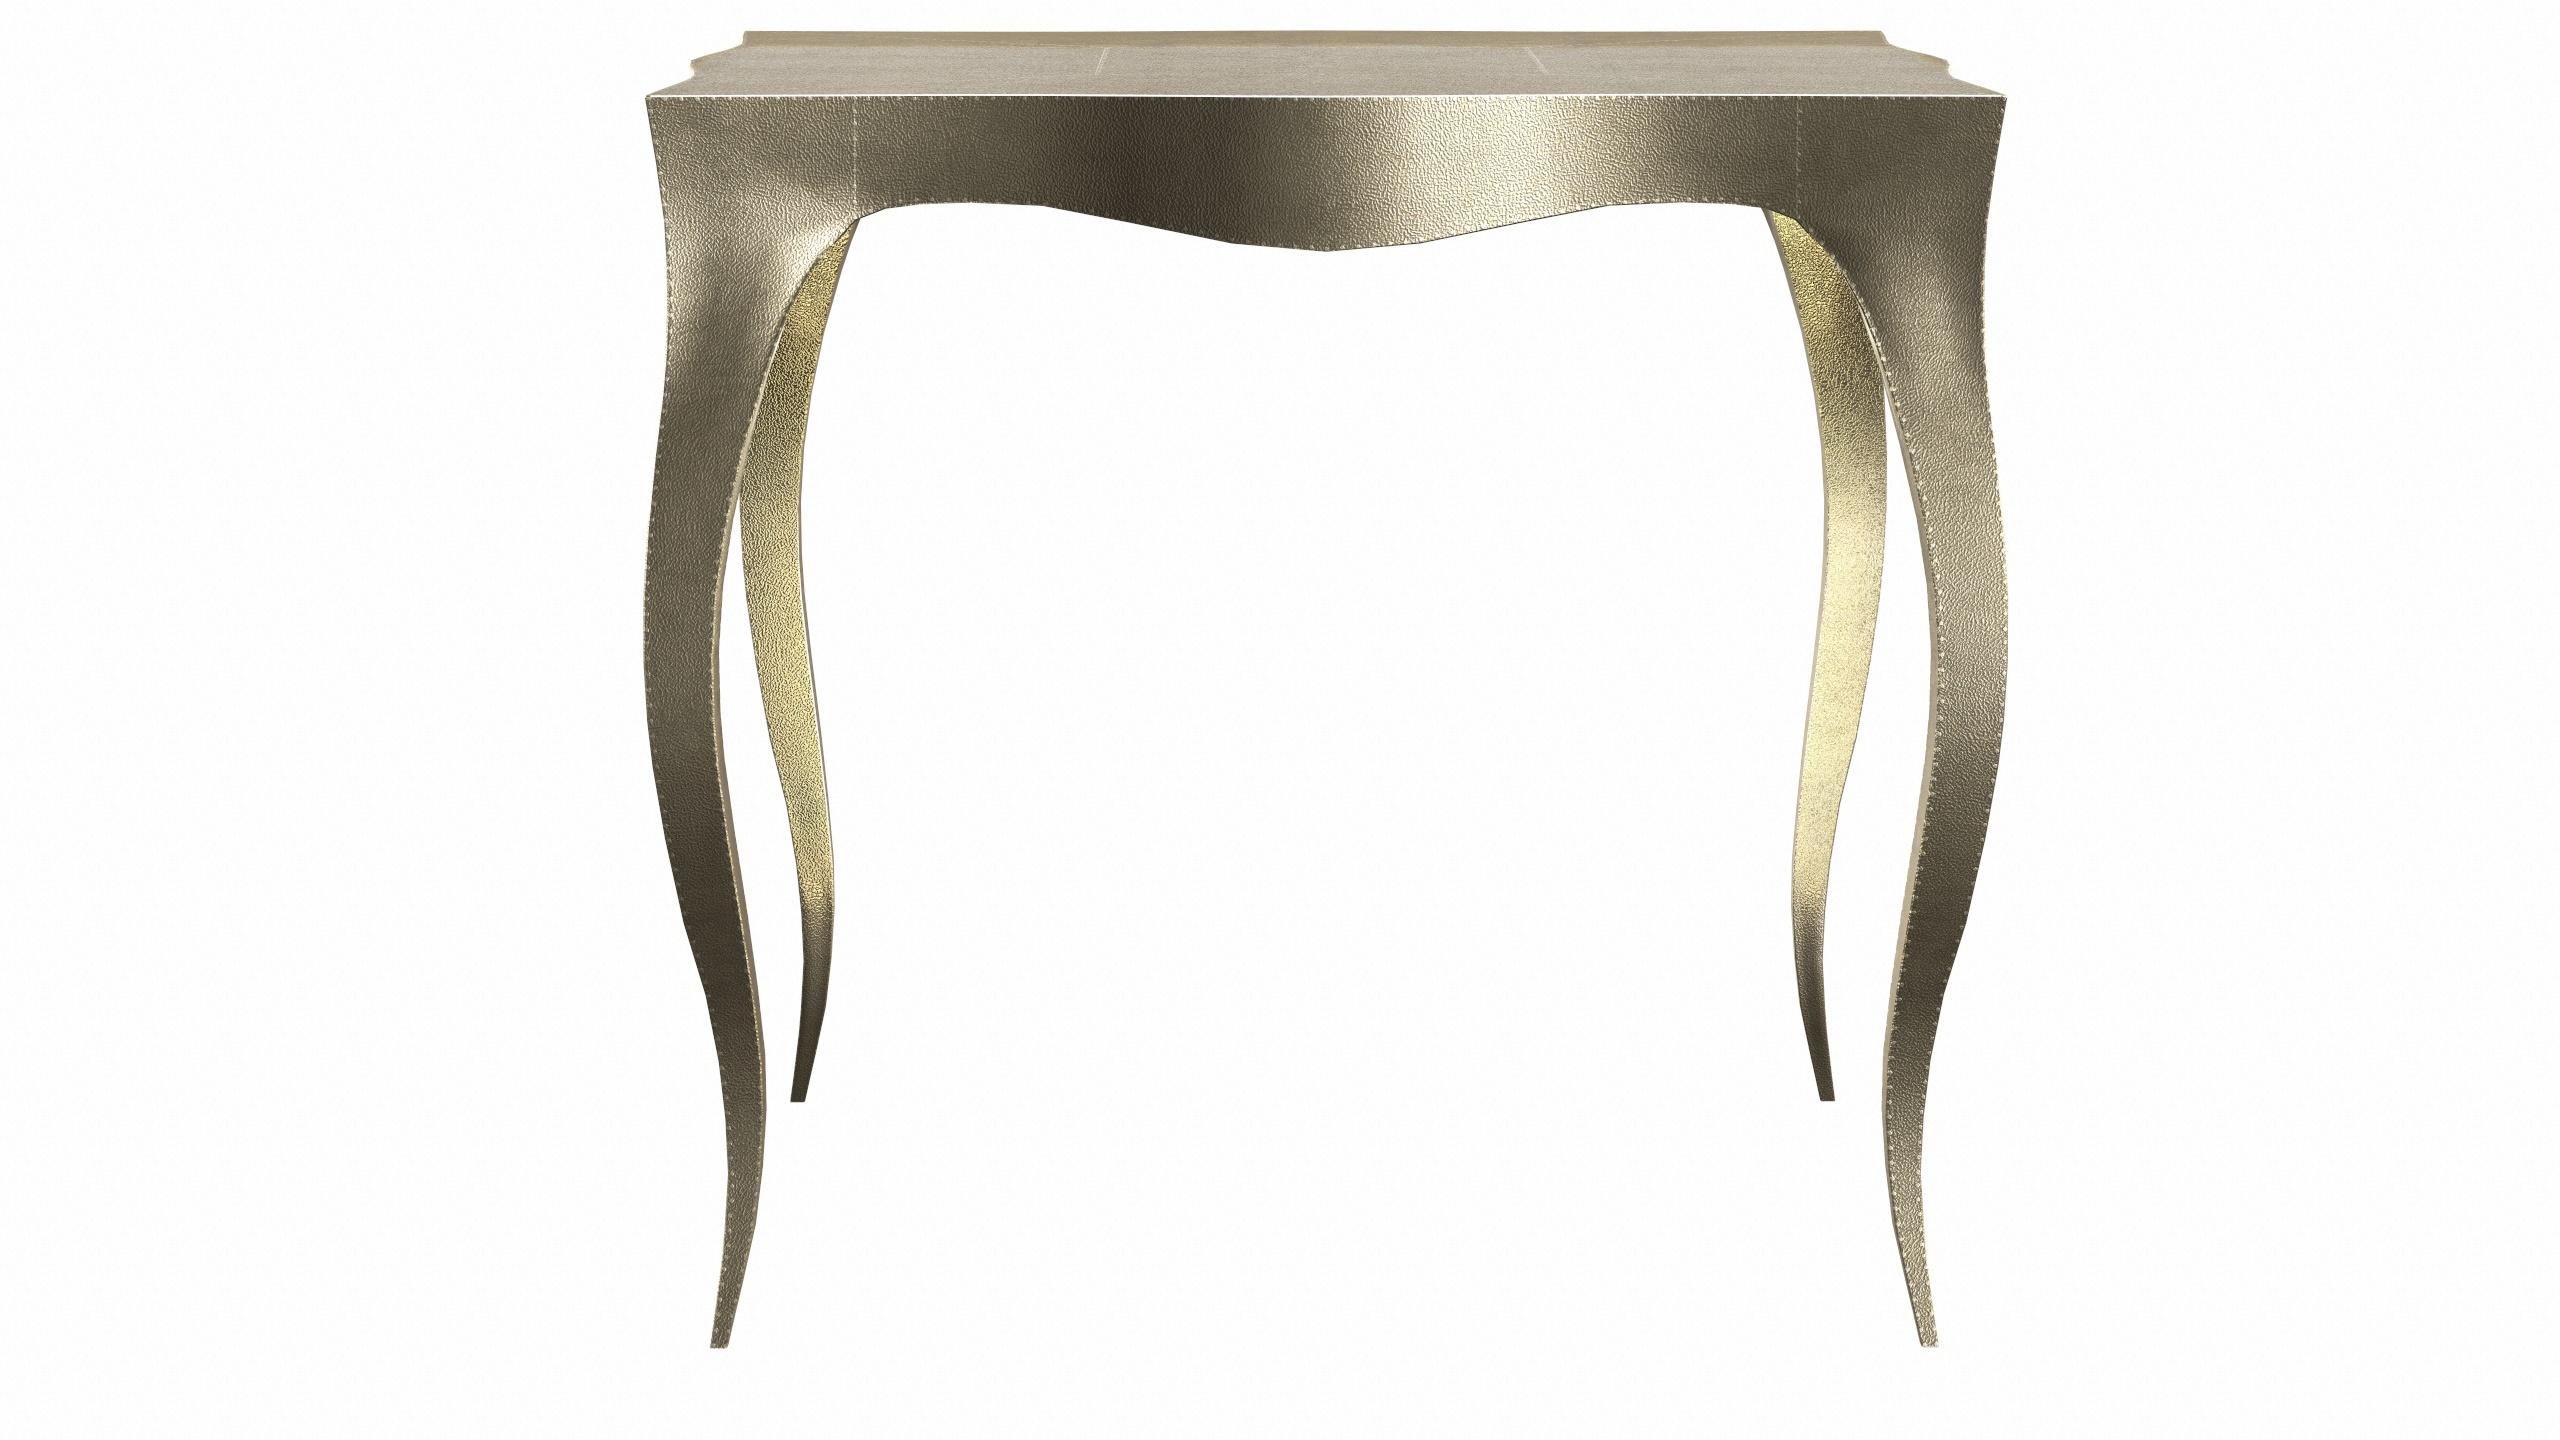 Woodwork Louise Art Deco Card Tables and Tea Tables Fine Hammered Brass by Paul Mathieu For Sale